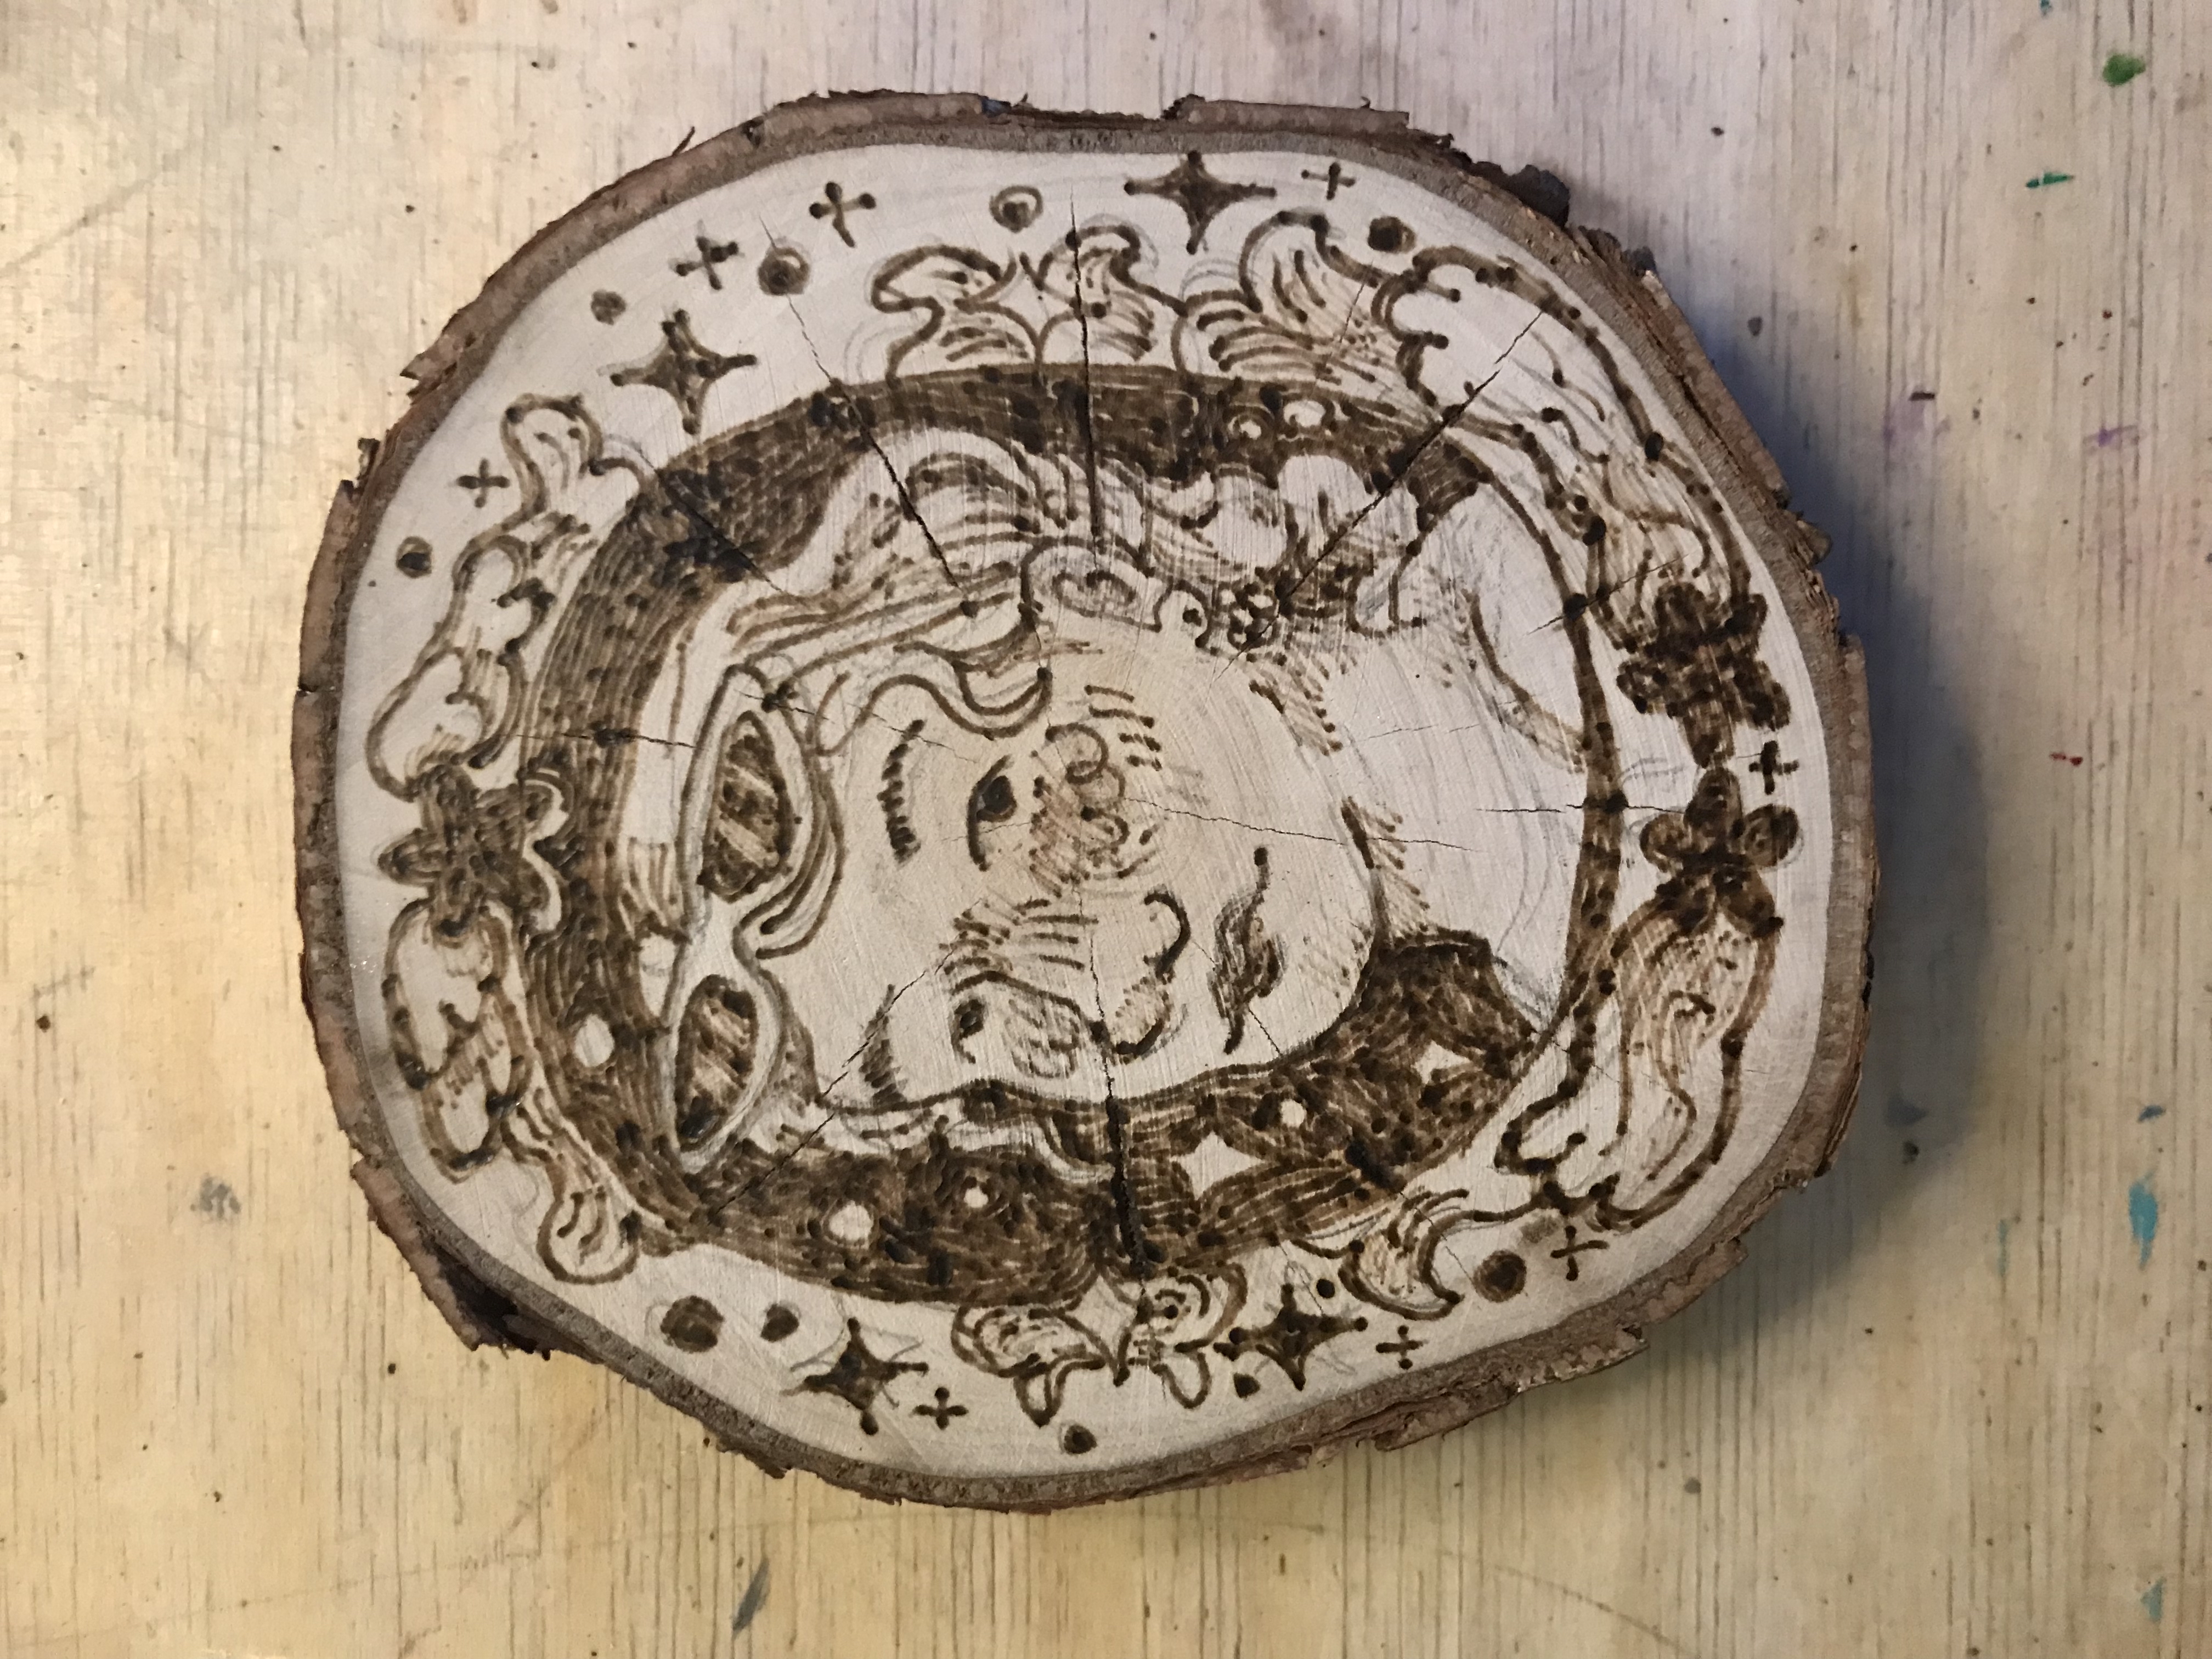 Woodburnt portrait of a person with wavy hair and cat eye sunglasses on top of their head, surrounded by shooting stars and frame like curving shapes.